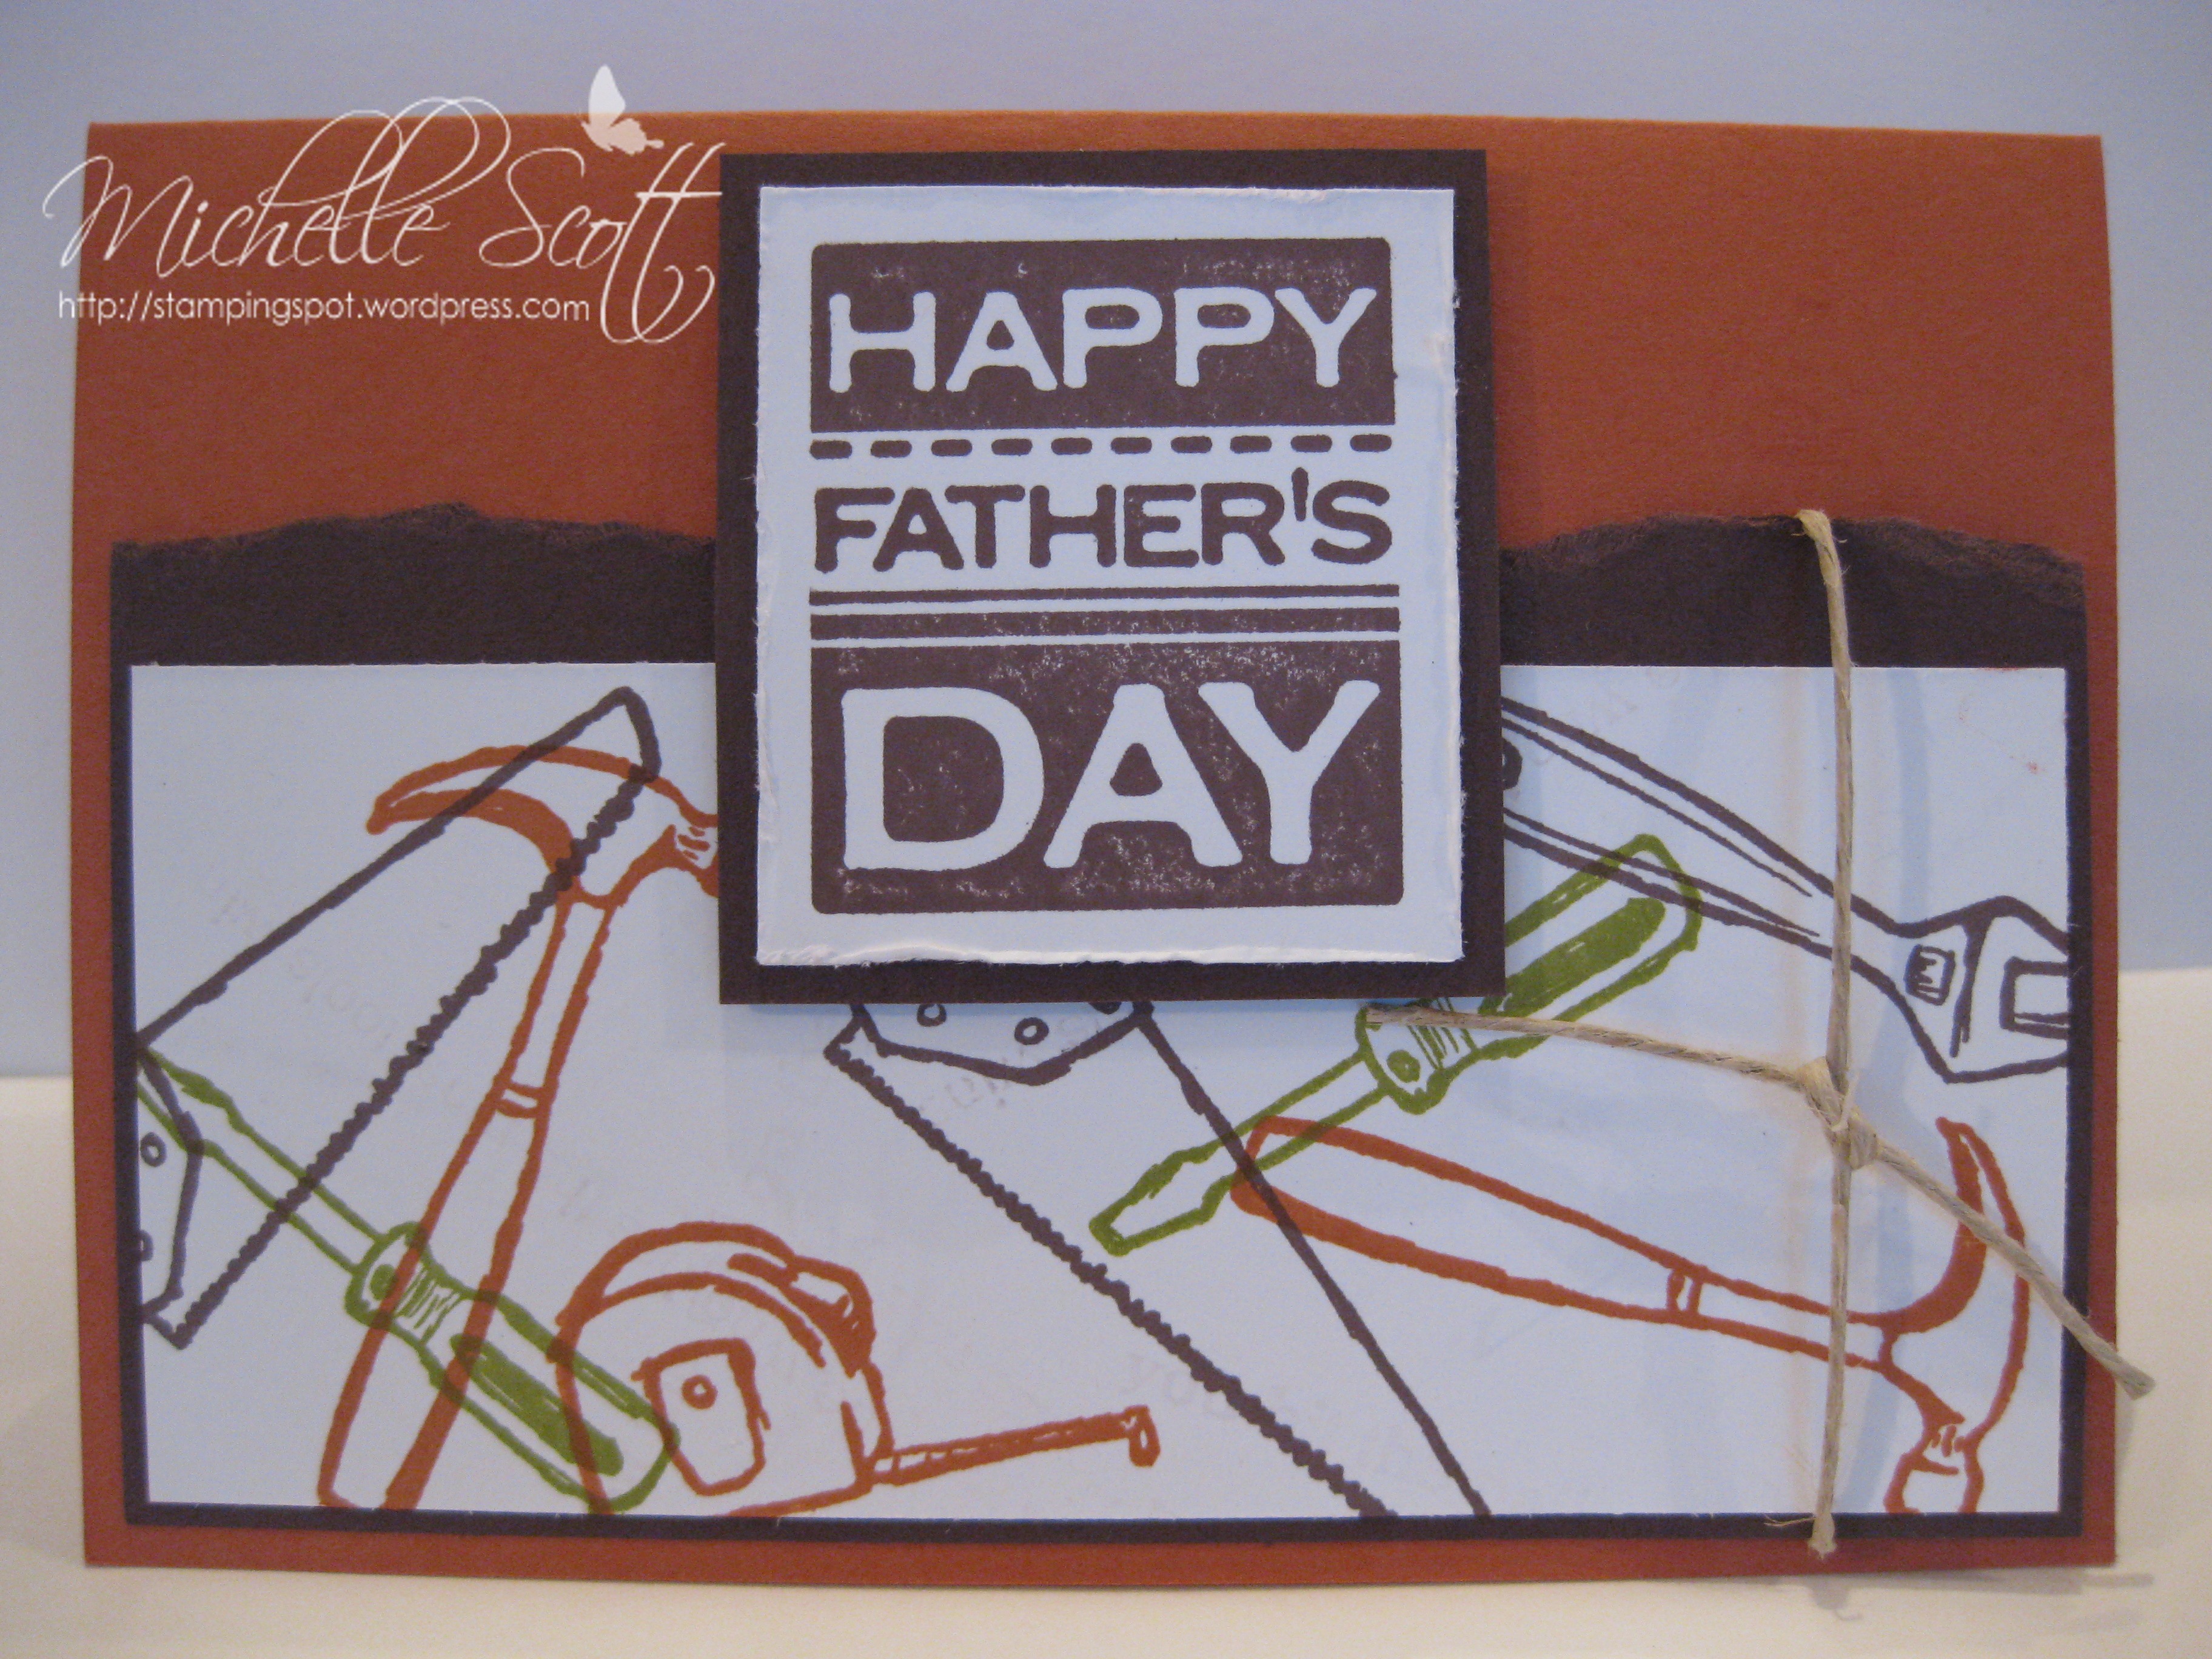 Happy Father’s Day card « Michelles Stamping Spot